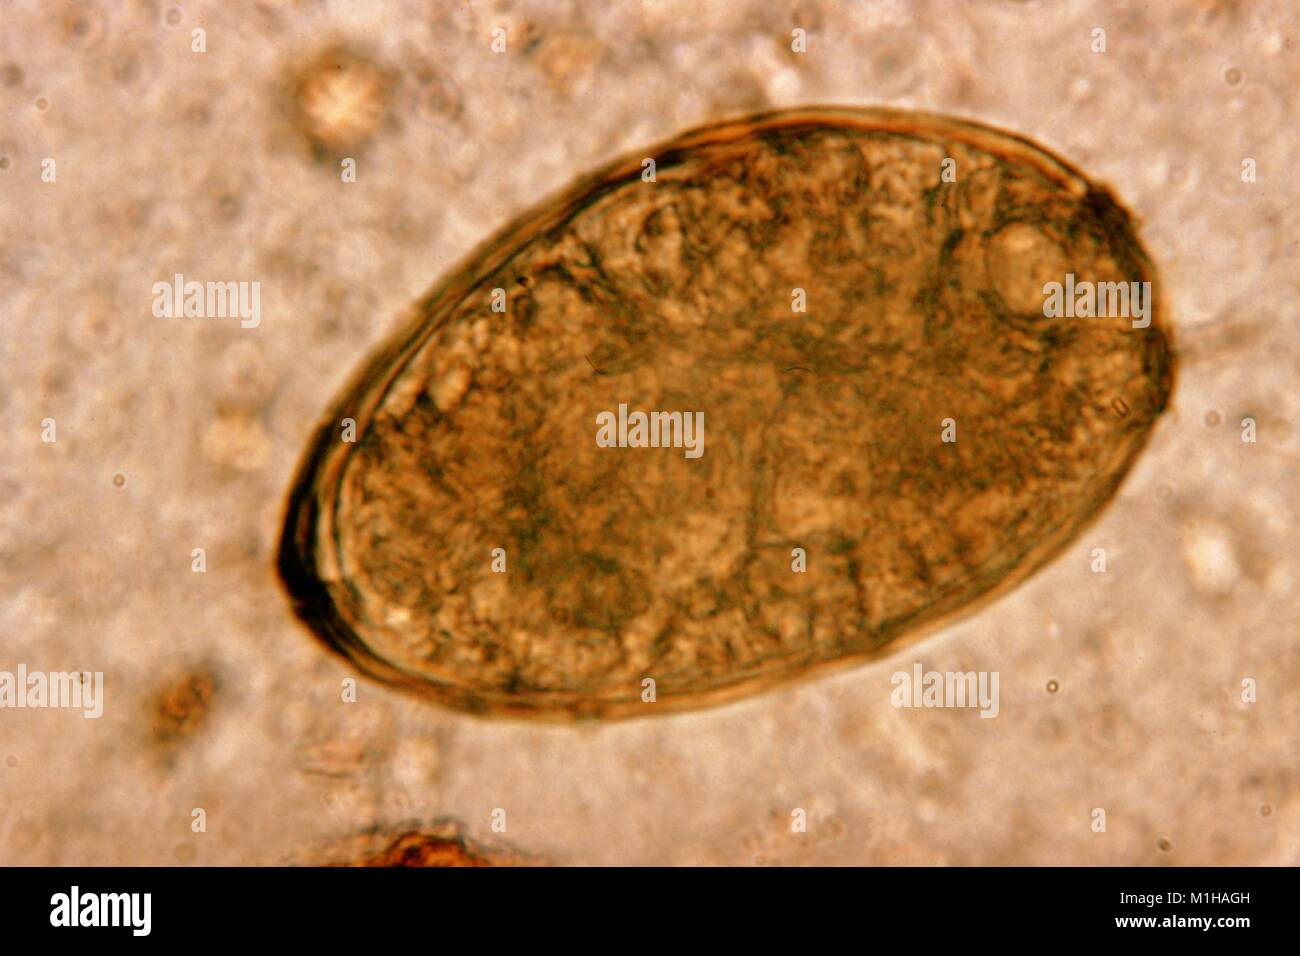 Photomicrograph of an egg from the trematode parasite Paragonimus westermani or the Japanese lung fluke, the major trematode species that causes the disease Paragonimiasis, 1979. Image courtesy CDC. () Stock Photo